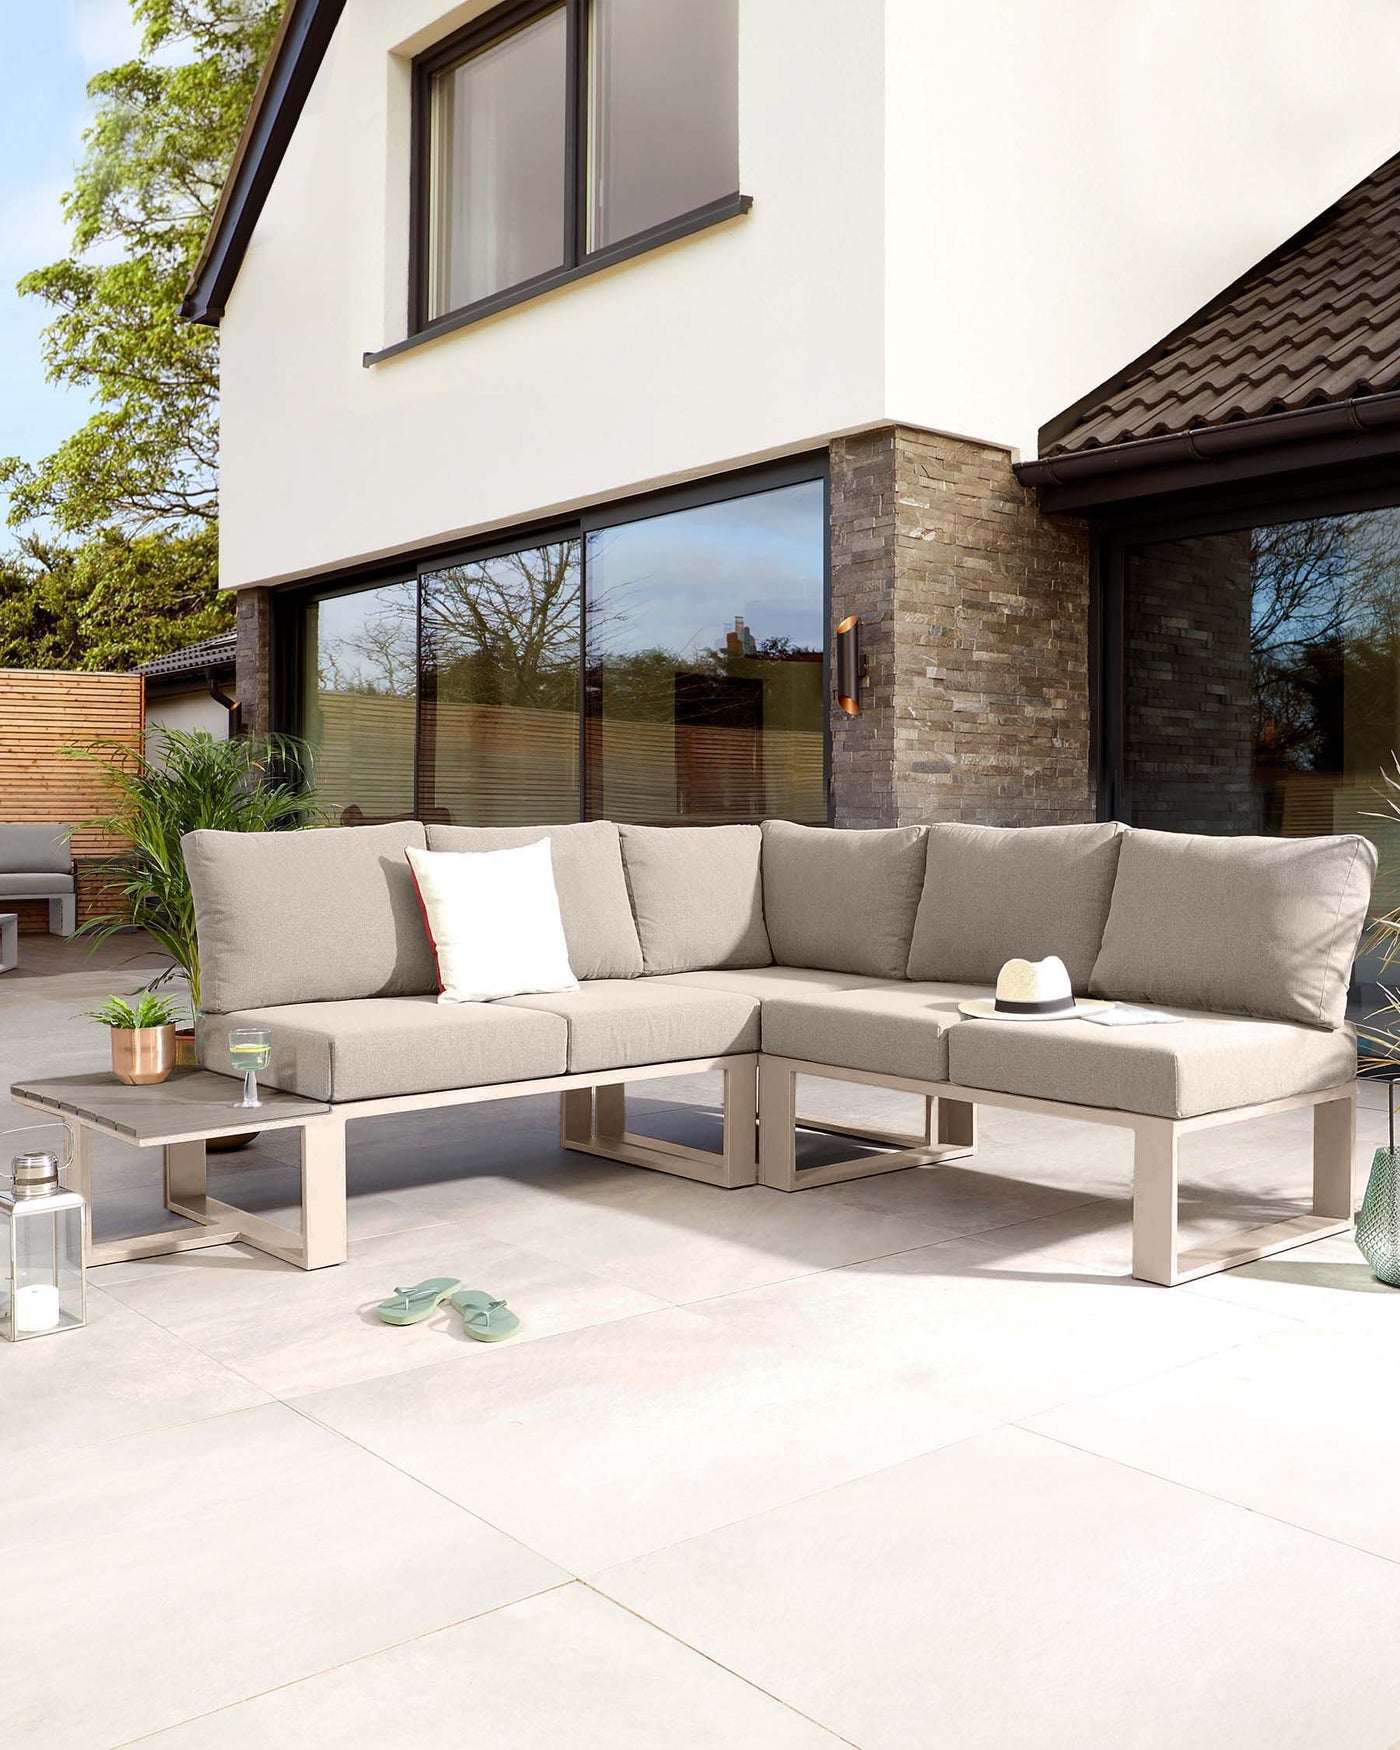 Modern outdoor L-shaped sectional sofa with light taupe cushions and a matching low rectangular coffee table, set against a residential patio backdrop.